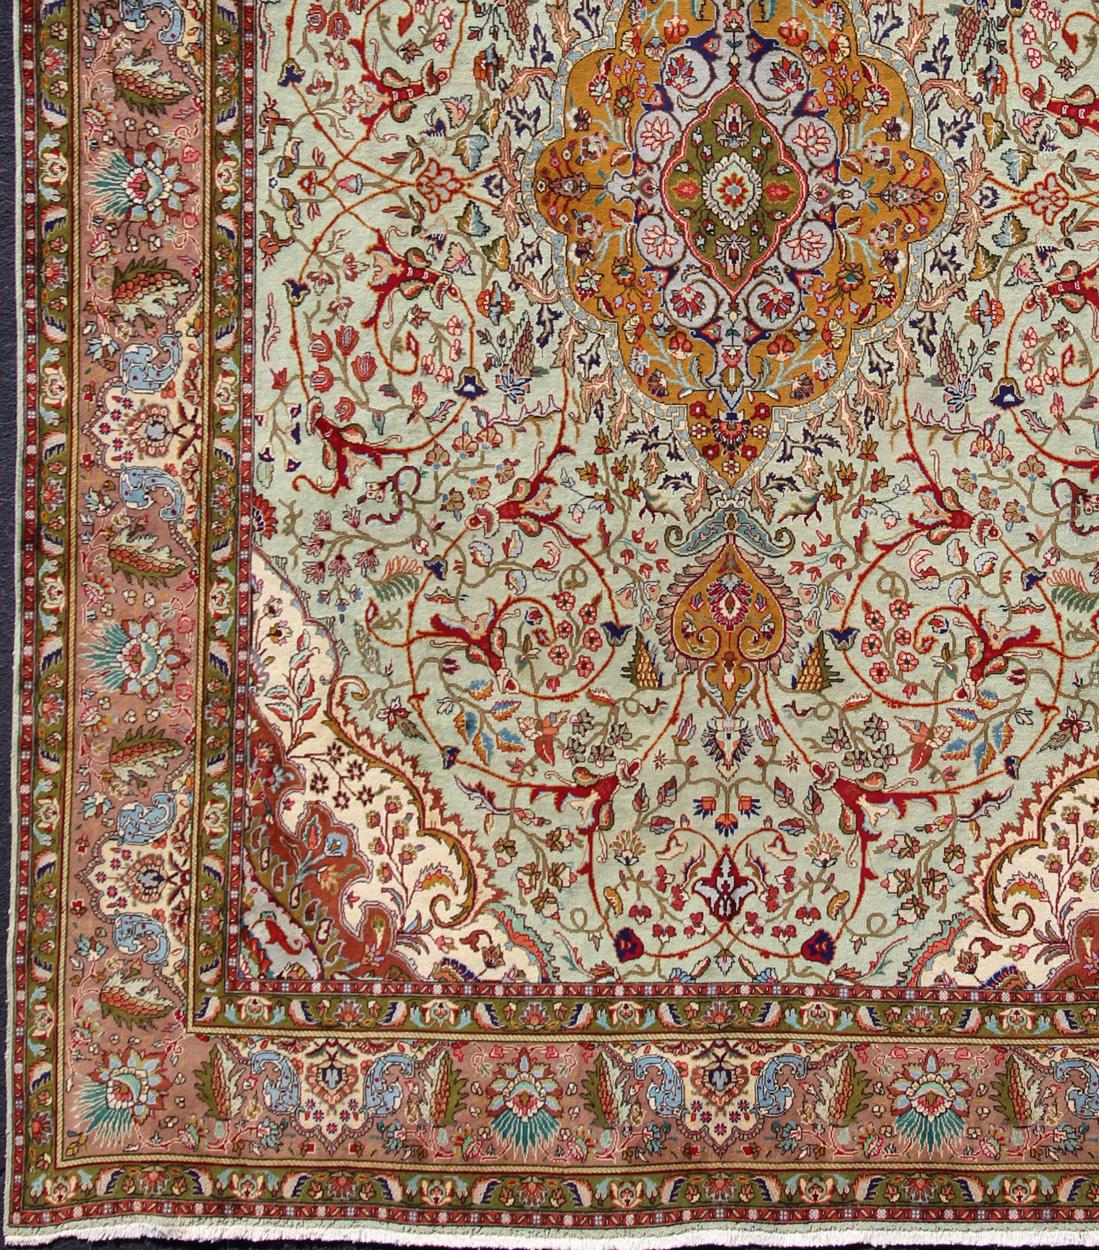 Hand-Knotted Classic Persian Tabriz Vintage Rug in Celadon Green, Salmon and Multi-Colors For Sale